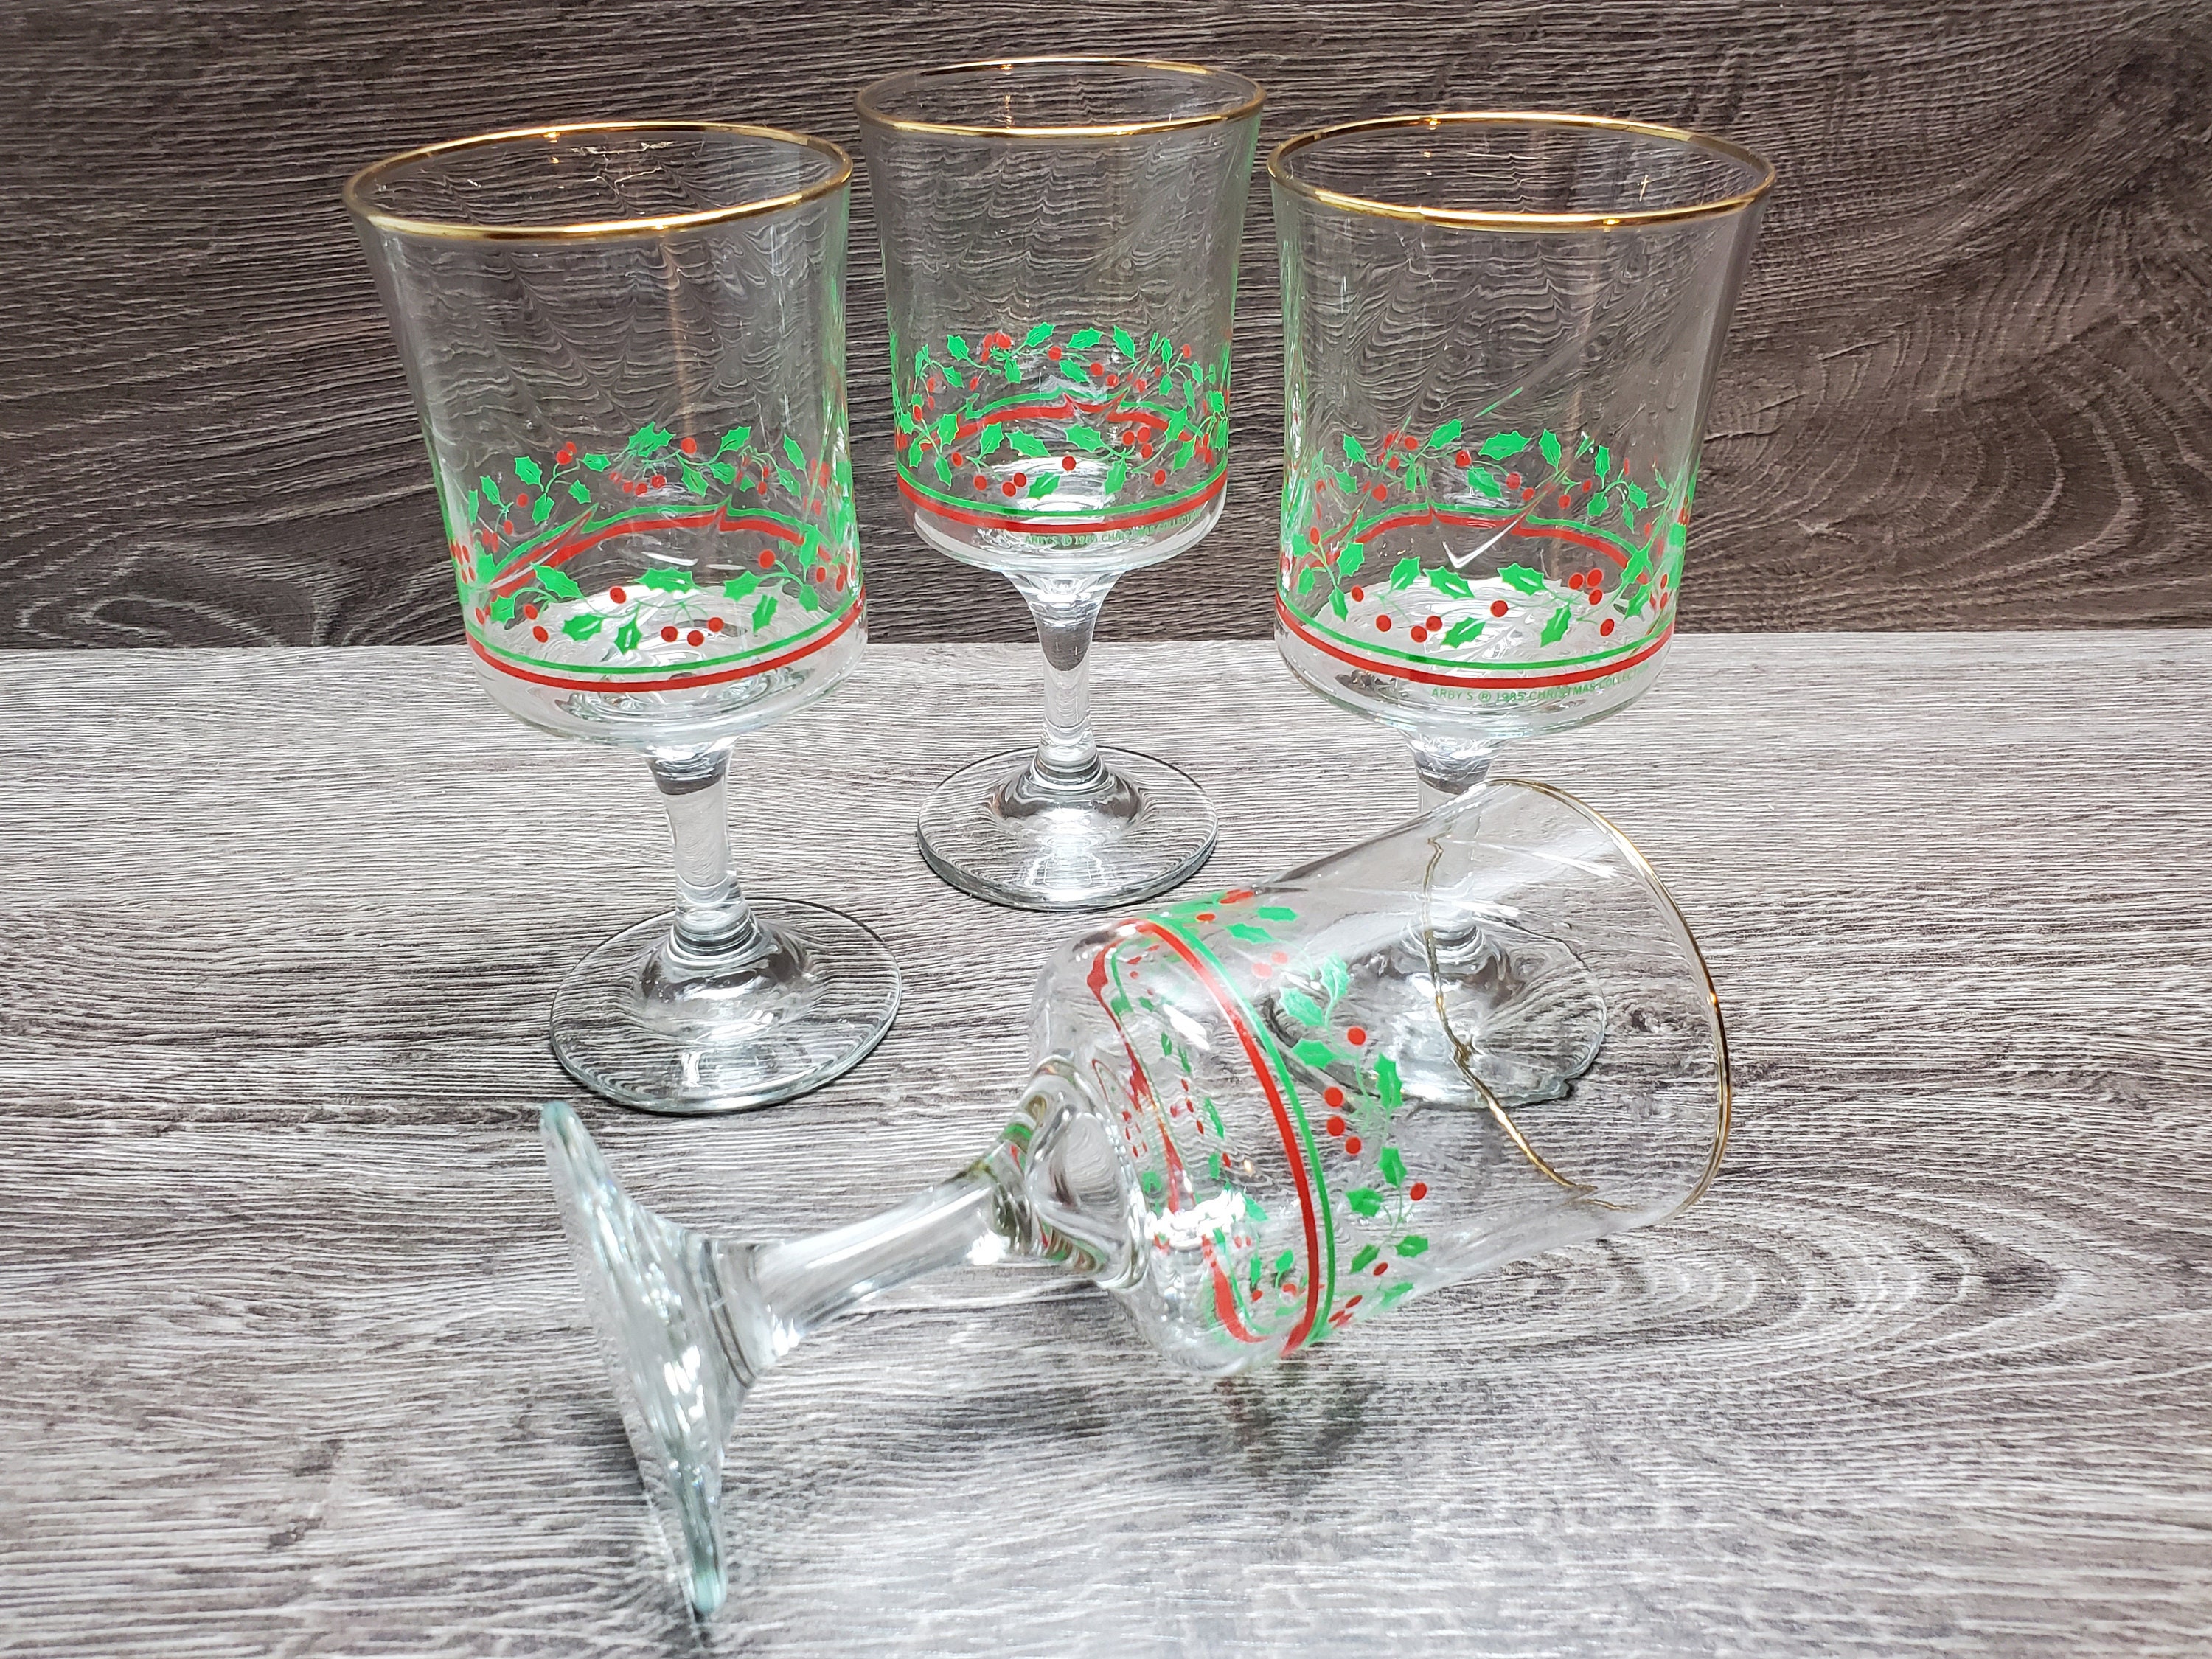 VTG Arby's Berry Set Of (4) 4 Eggnog Holiday Glasses With Gold Tone Accent  Rims